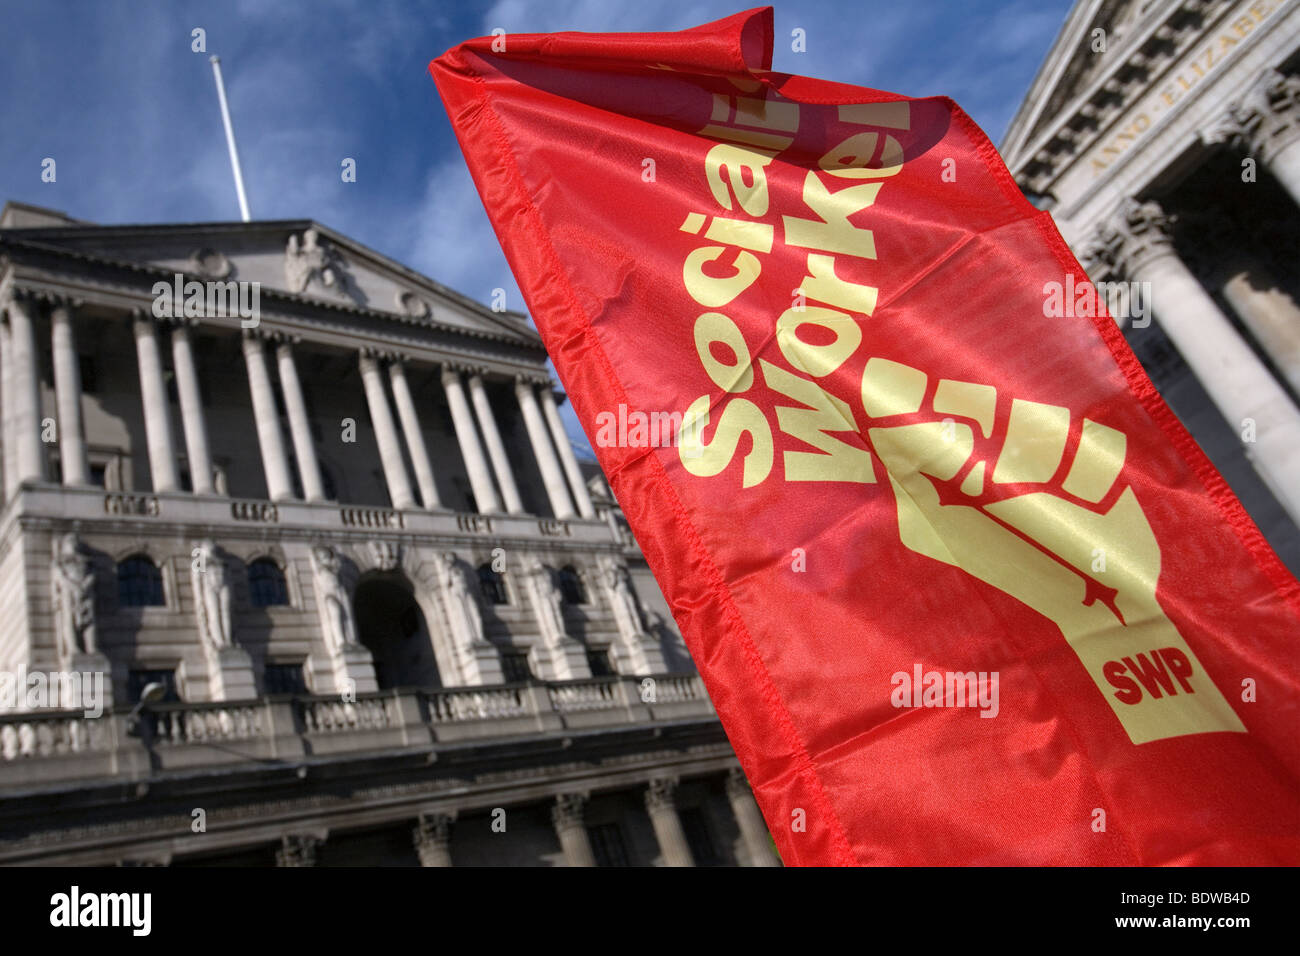 a socialist workers party banner opposing the bank of england in london Stock Photo